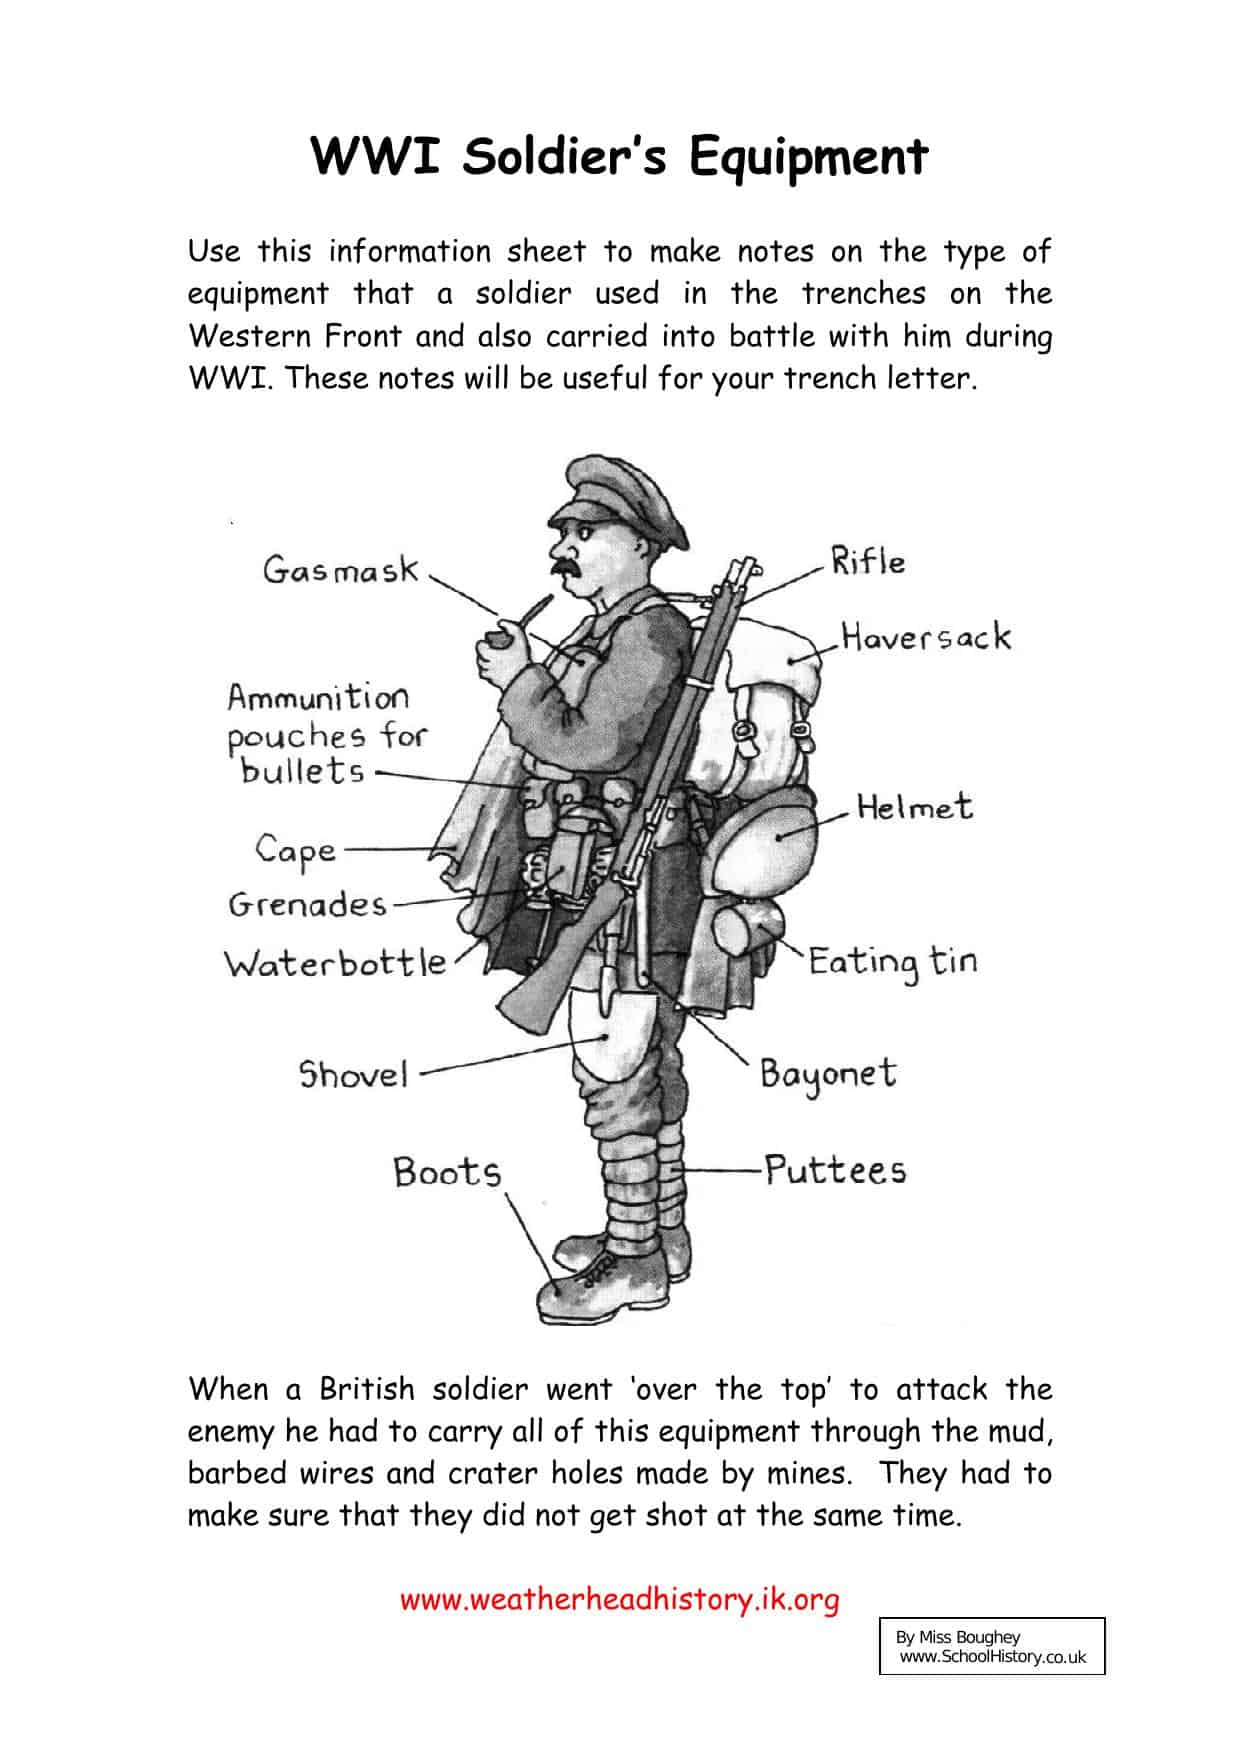 wwi-soldier-s-equipment-worksheet-ks3-lesson-resource